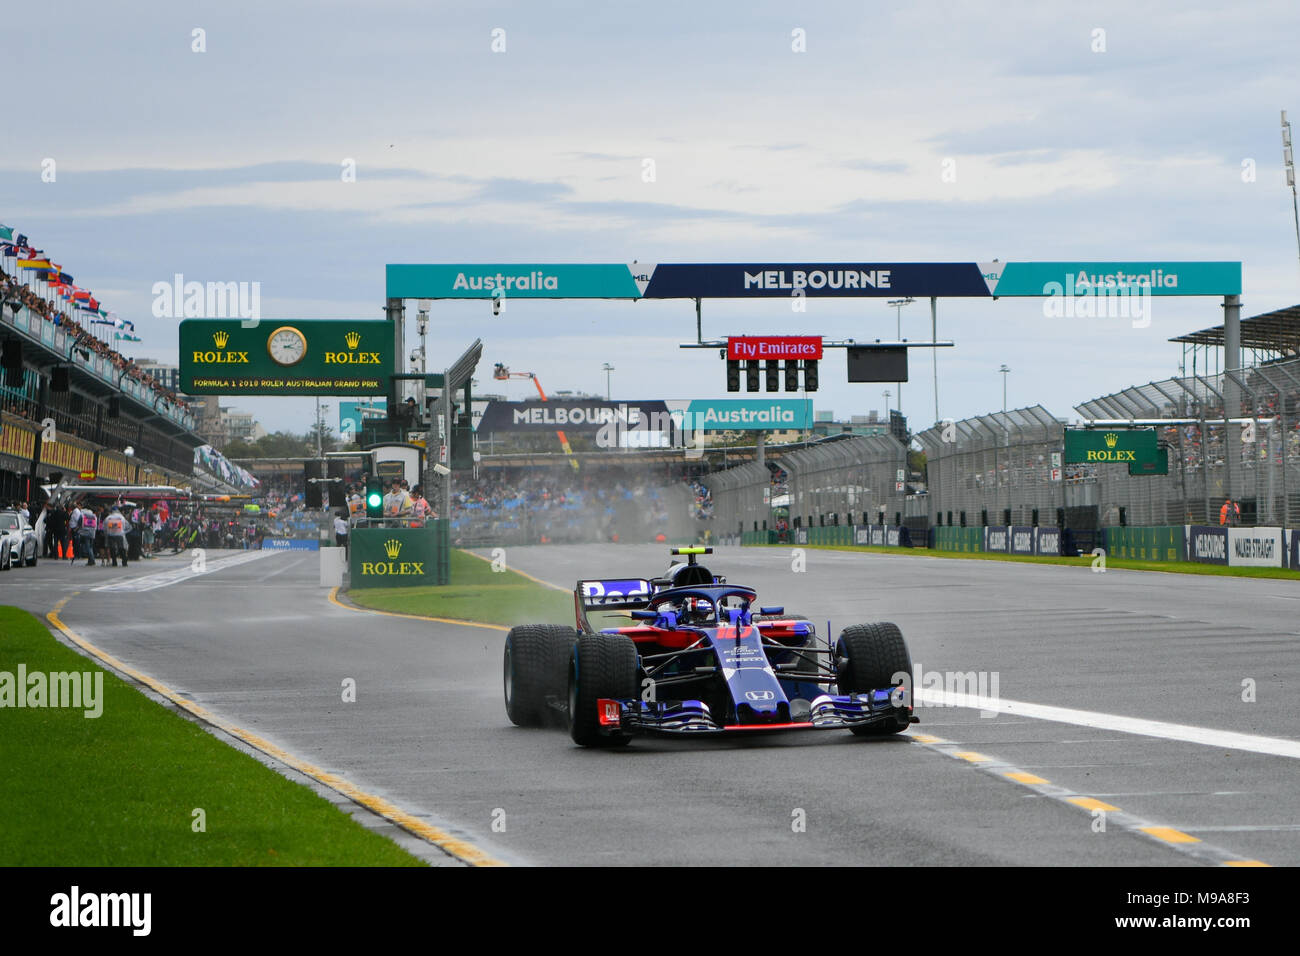 Albert Park, Melbourne, Australia. 24th Mar, 2018. Pierre Gasly (FRA) #10 from the Red Bull Toro Rosso Honda team leaves pit lane during practice session three at the 2018 Australian Formula One Grand Prix at Albert Park, Melbourne, Australia. Sydney Low/Cal Sport Media/Alamy Live News Stock Photo